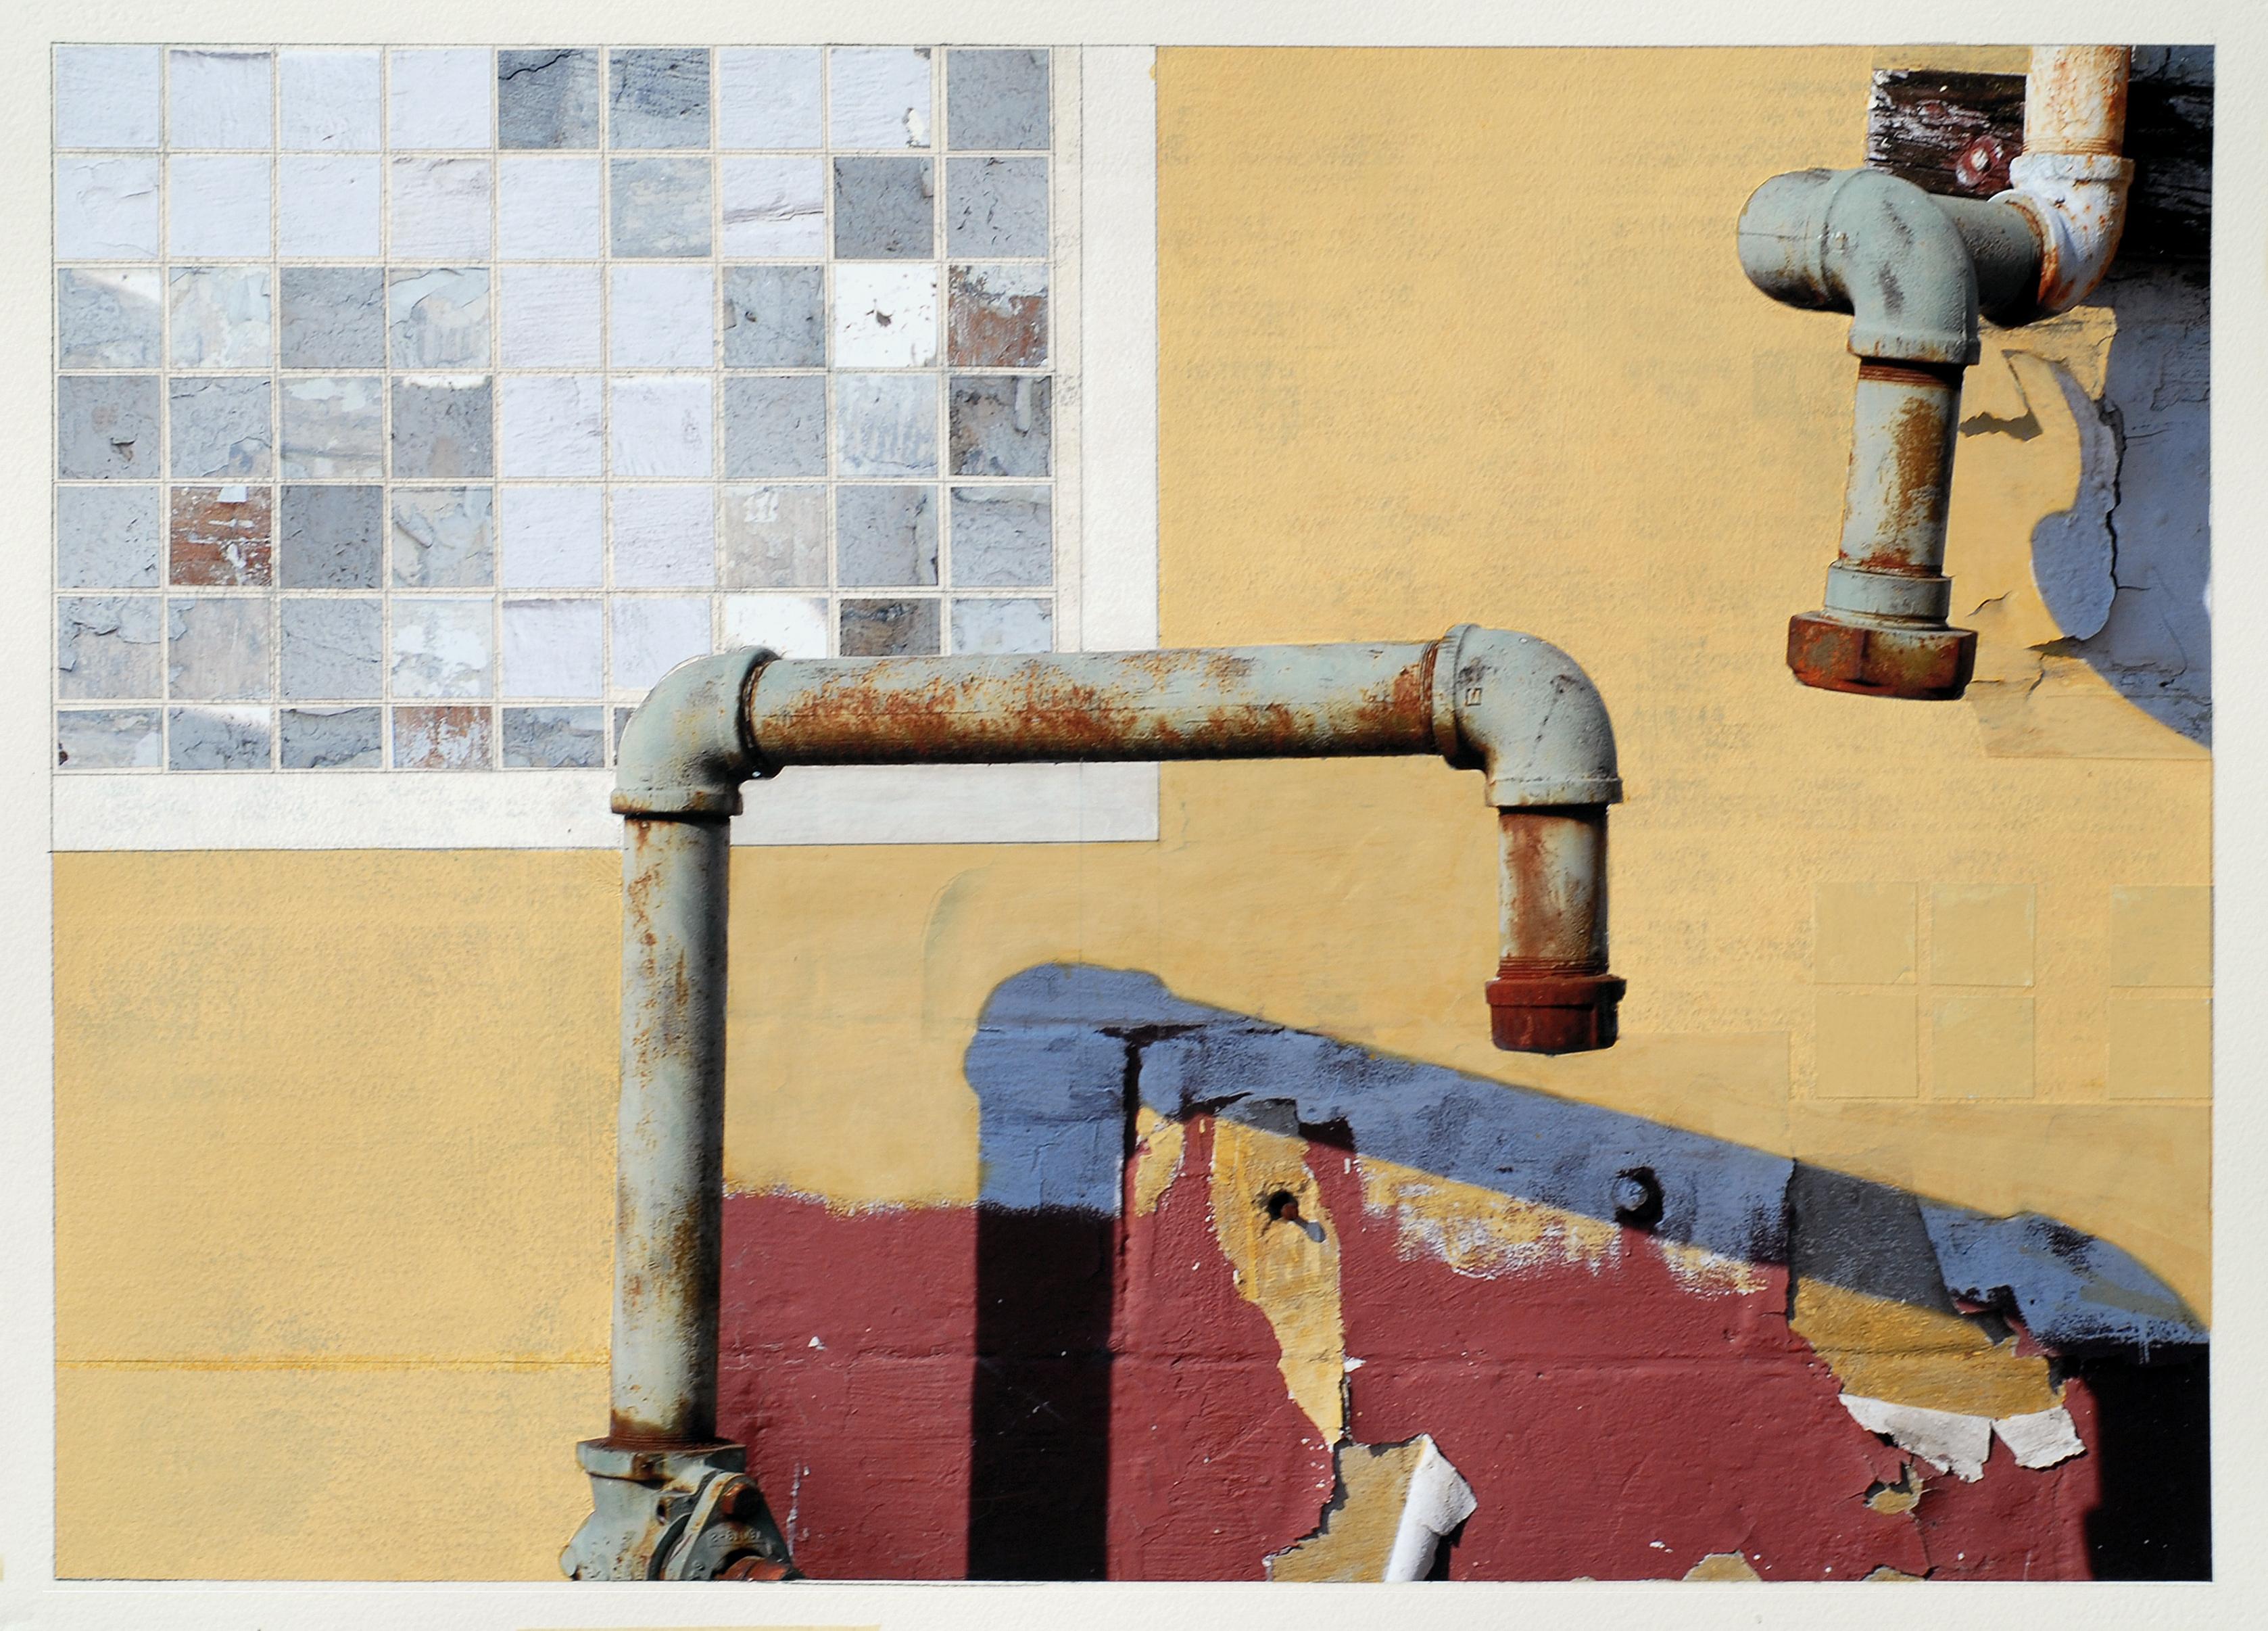 Lee pays close attention to industrial space in Pipe Fiction. In this mixed media work on paper, the artist transforms an average exterior shot into an interesting composition through his use of vibrant colors and various textures. Intrigue lies